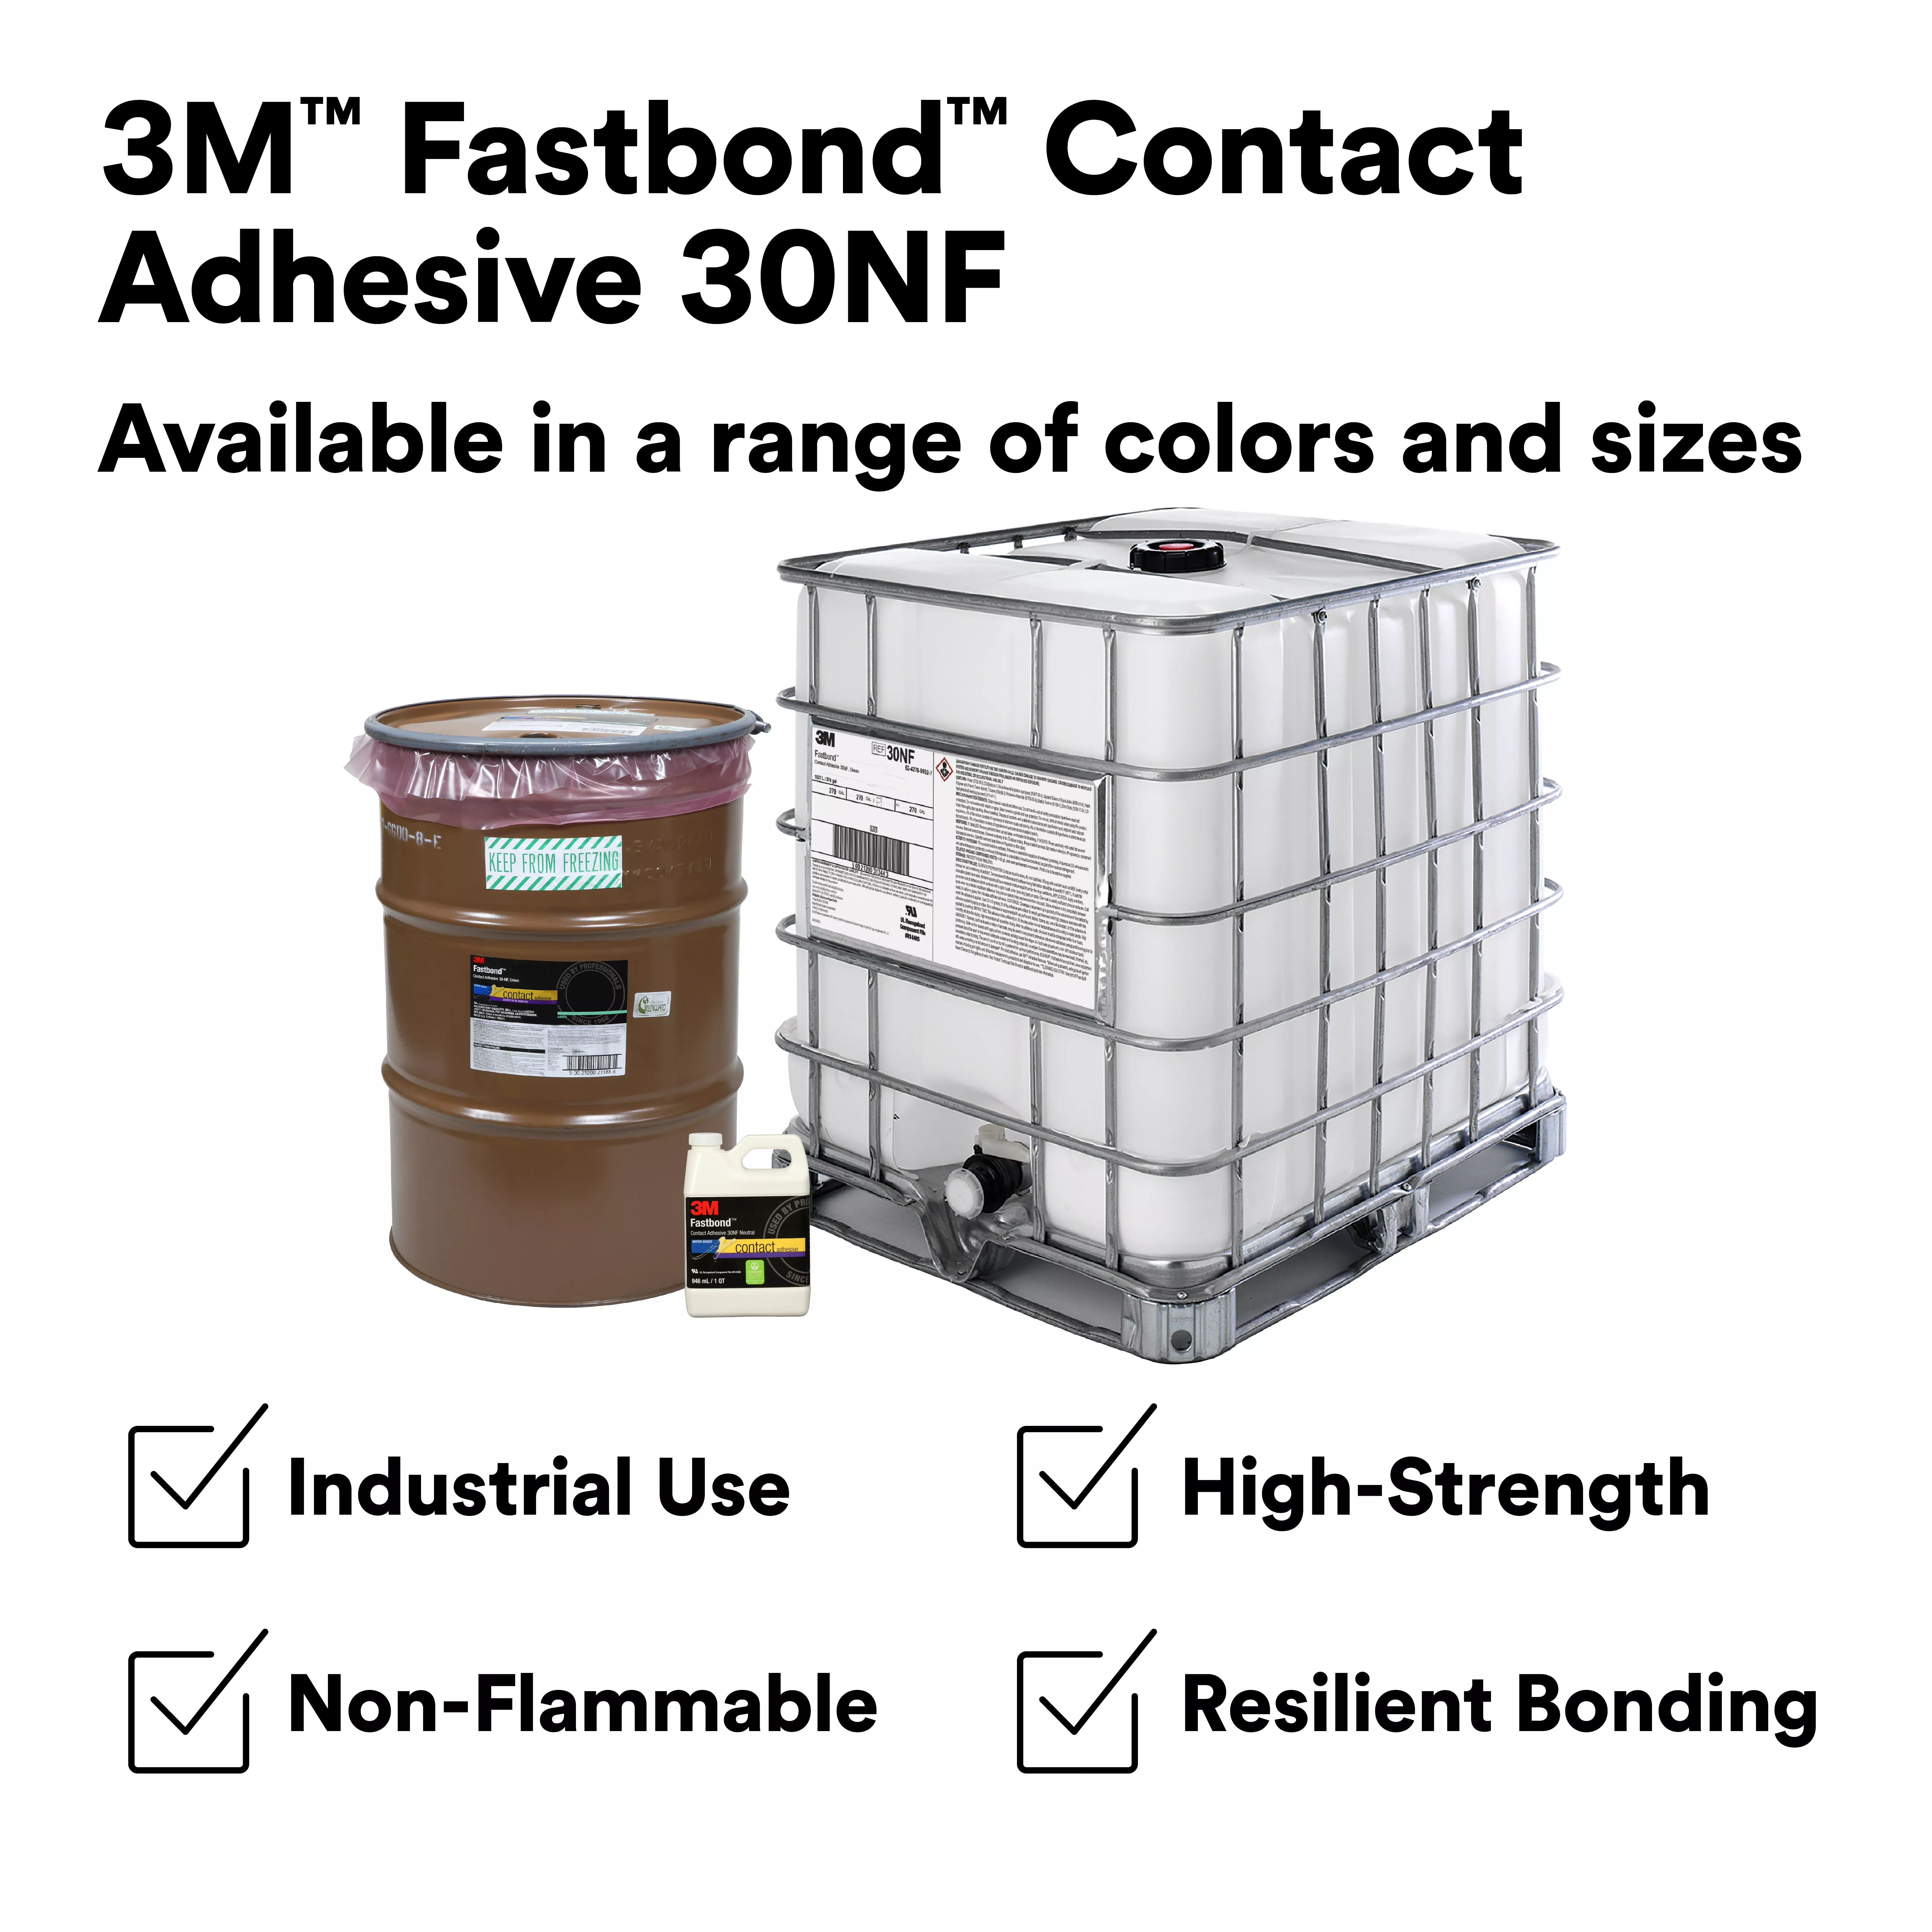 SKU 7000046567 | 3M™ Fastbond™ Contact Adhesive 30NF